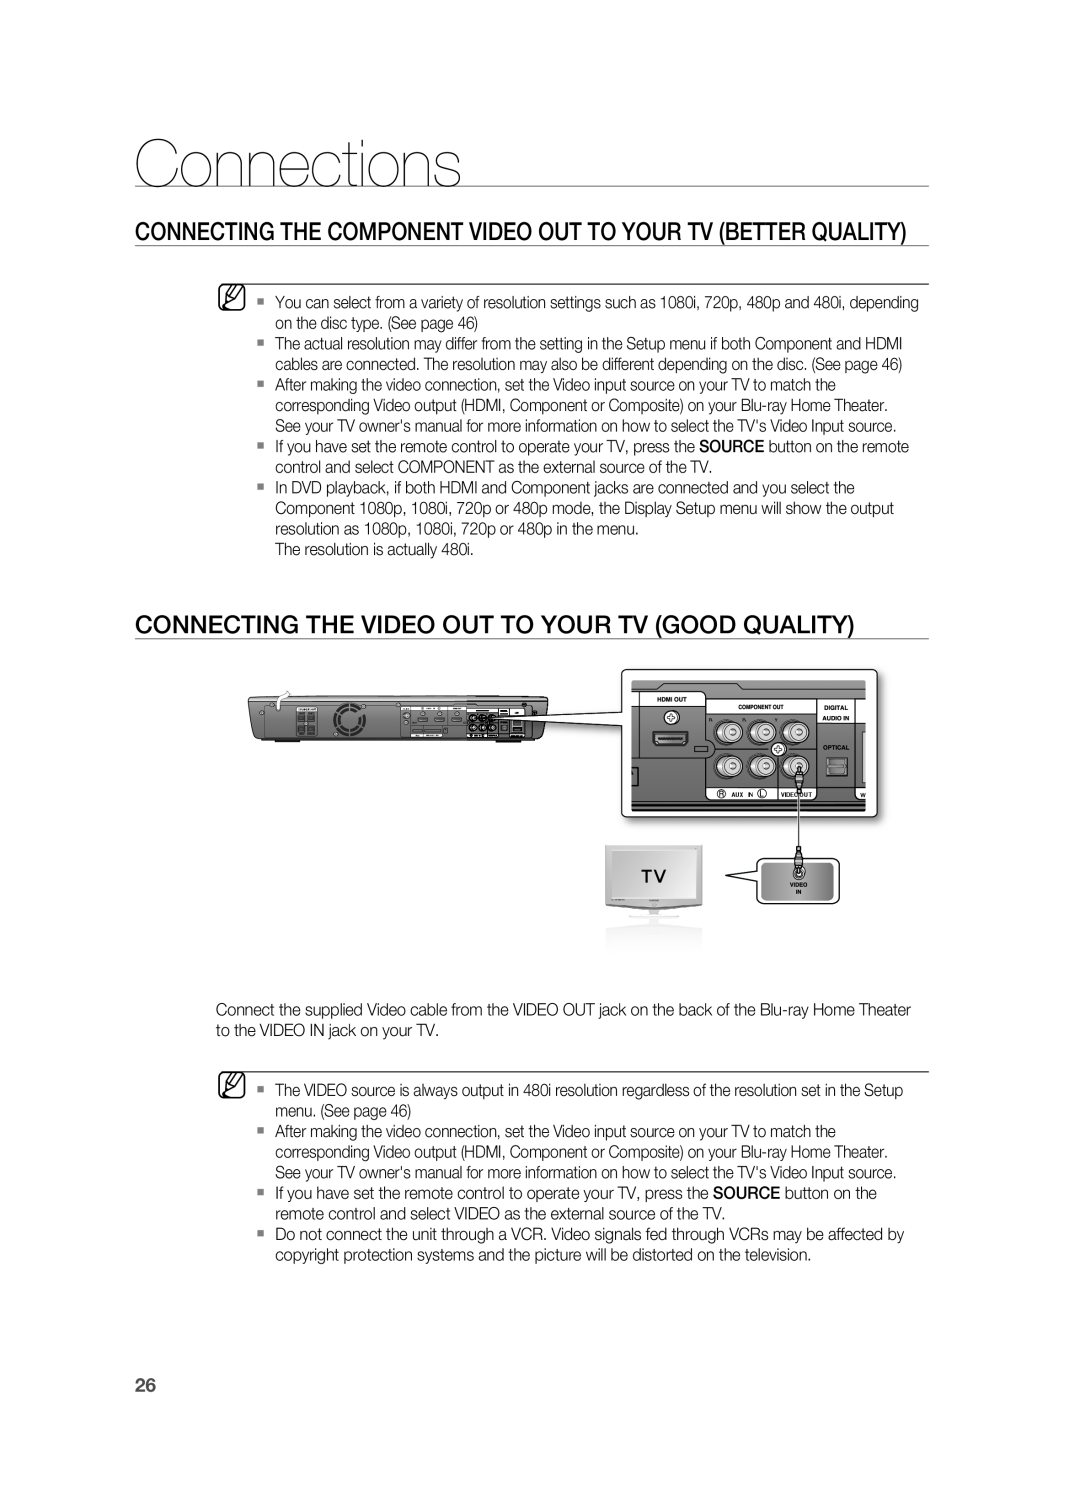 Samsung HT-BD3252 user manual Connecting The Video Out To Your Tv Good Quality, Connections 